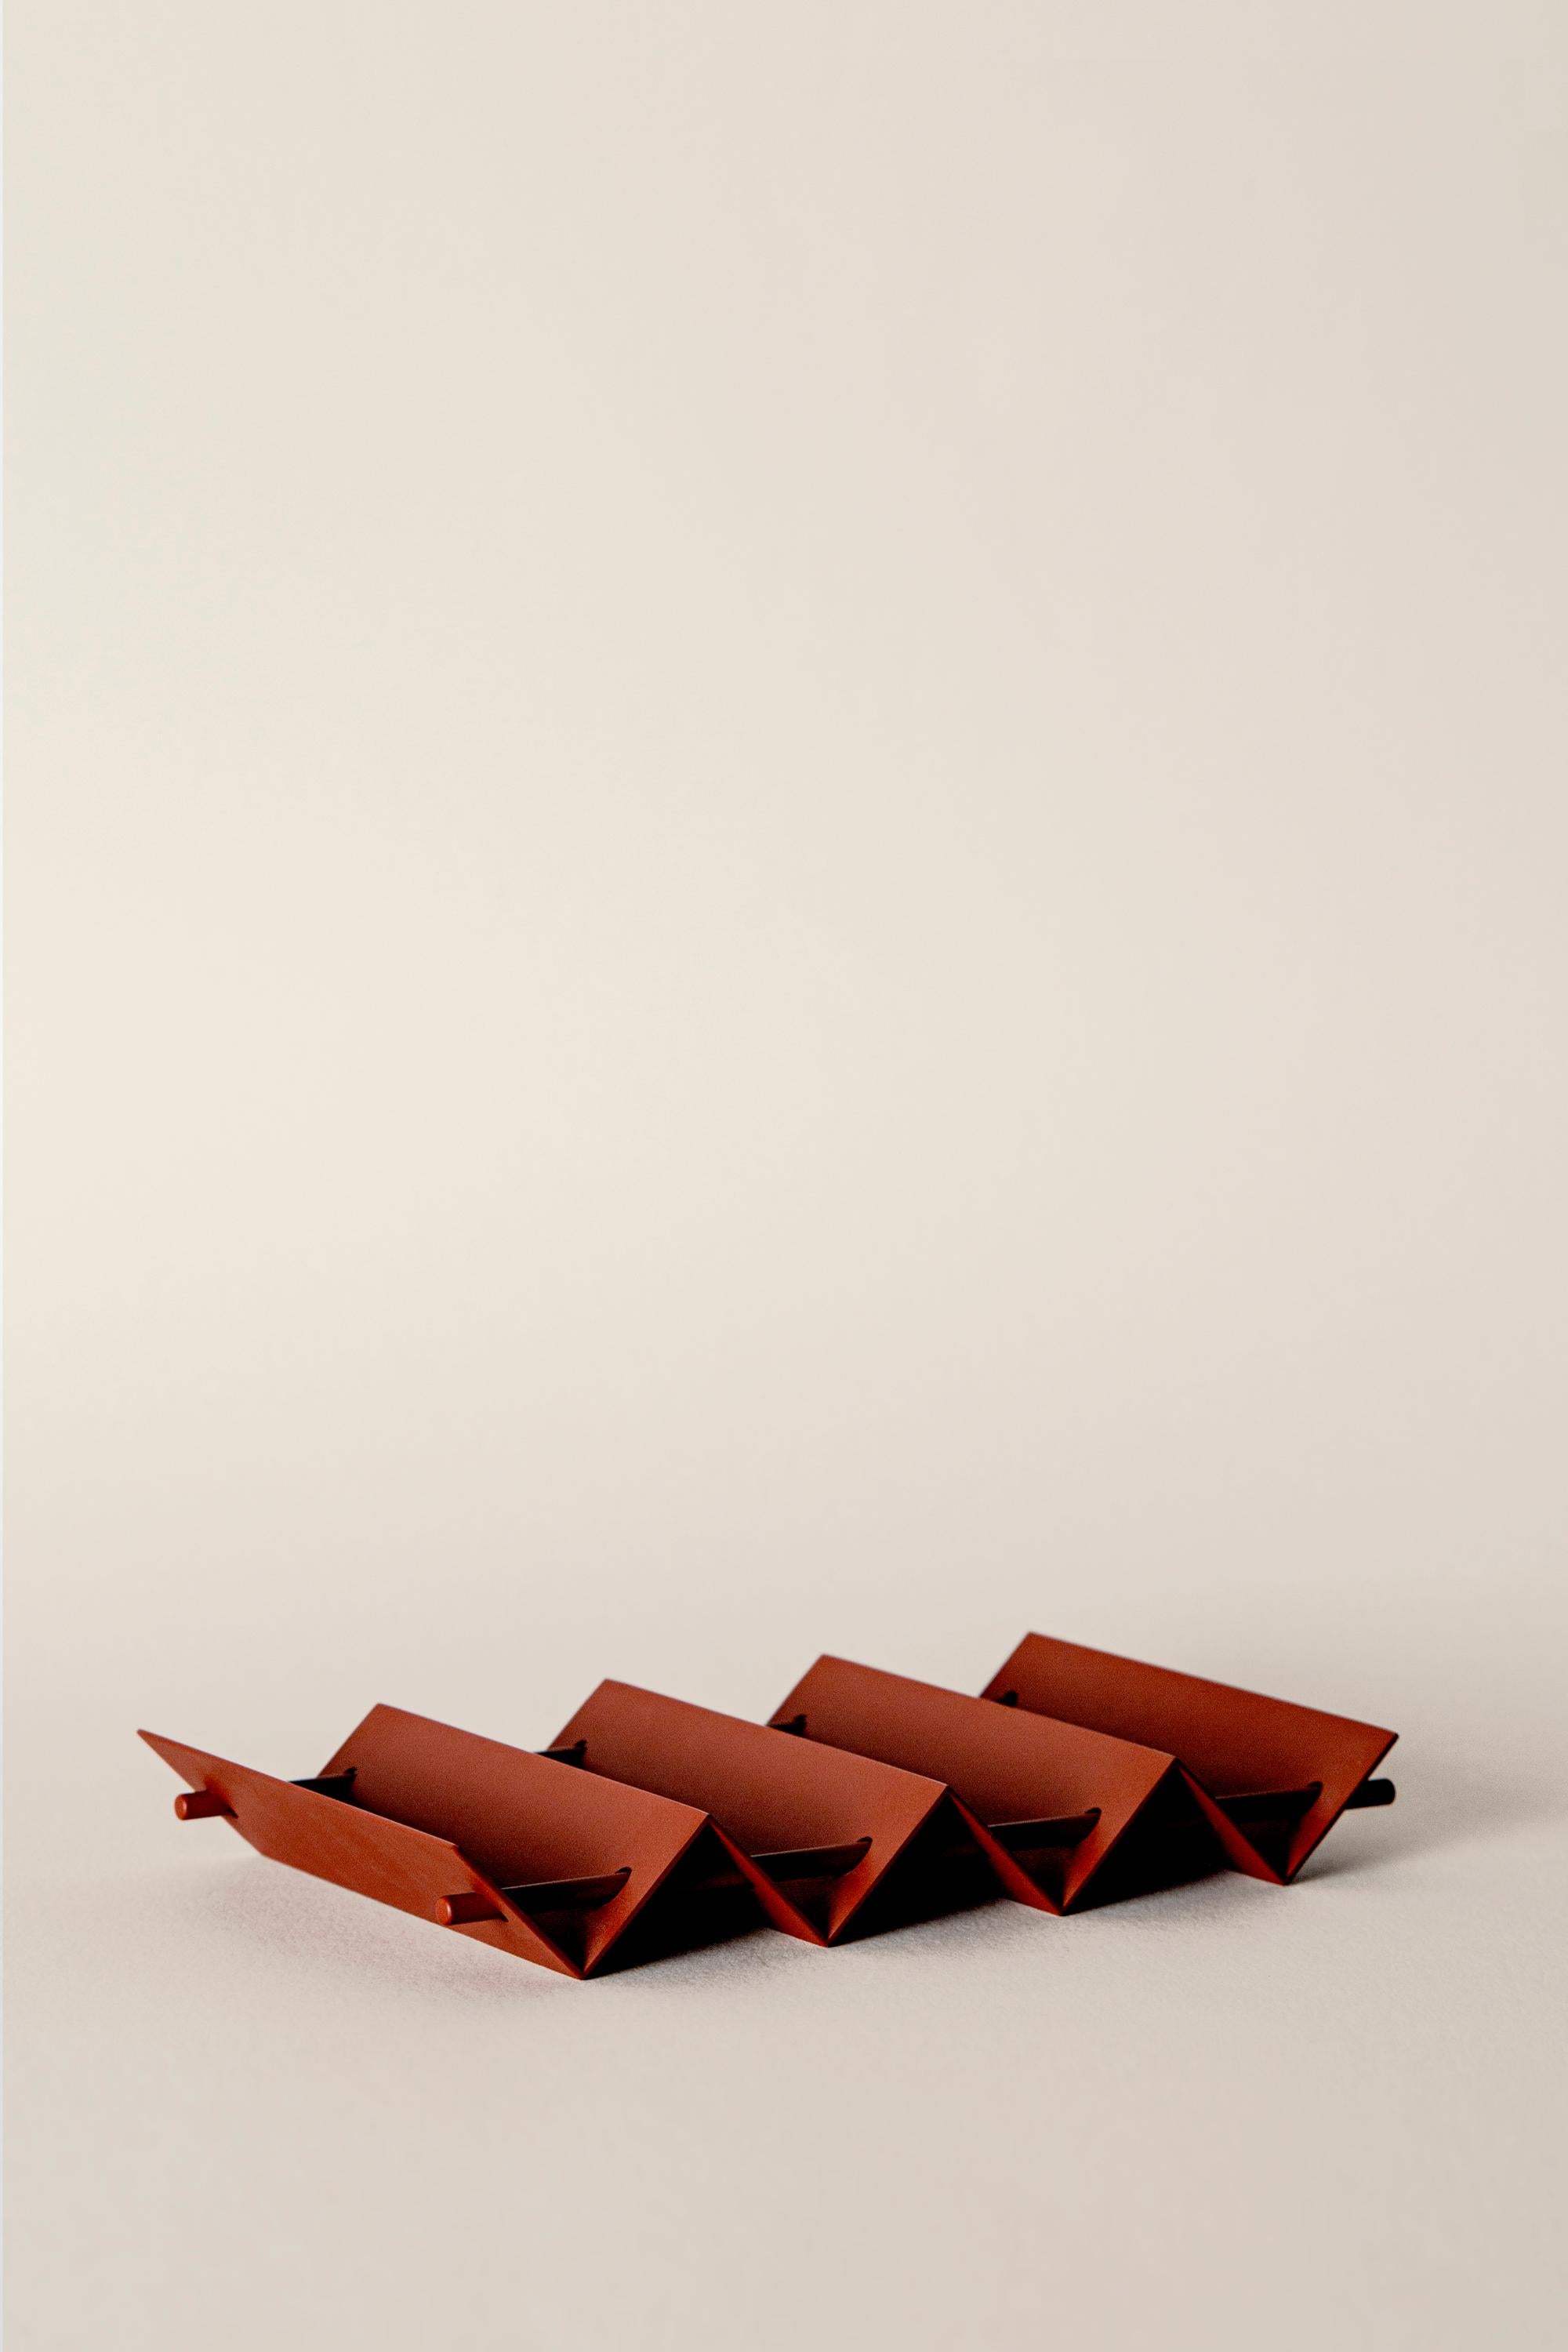 Card Tray　
Material: Iron

Series inspired by architectural elements
Continuity of roofs and stairs
Light structure is the theme of this series.